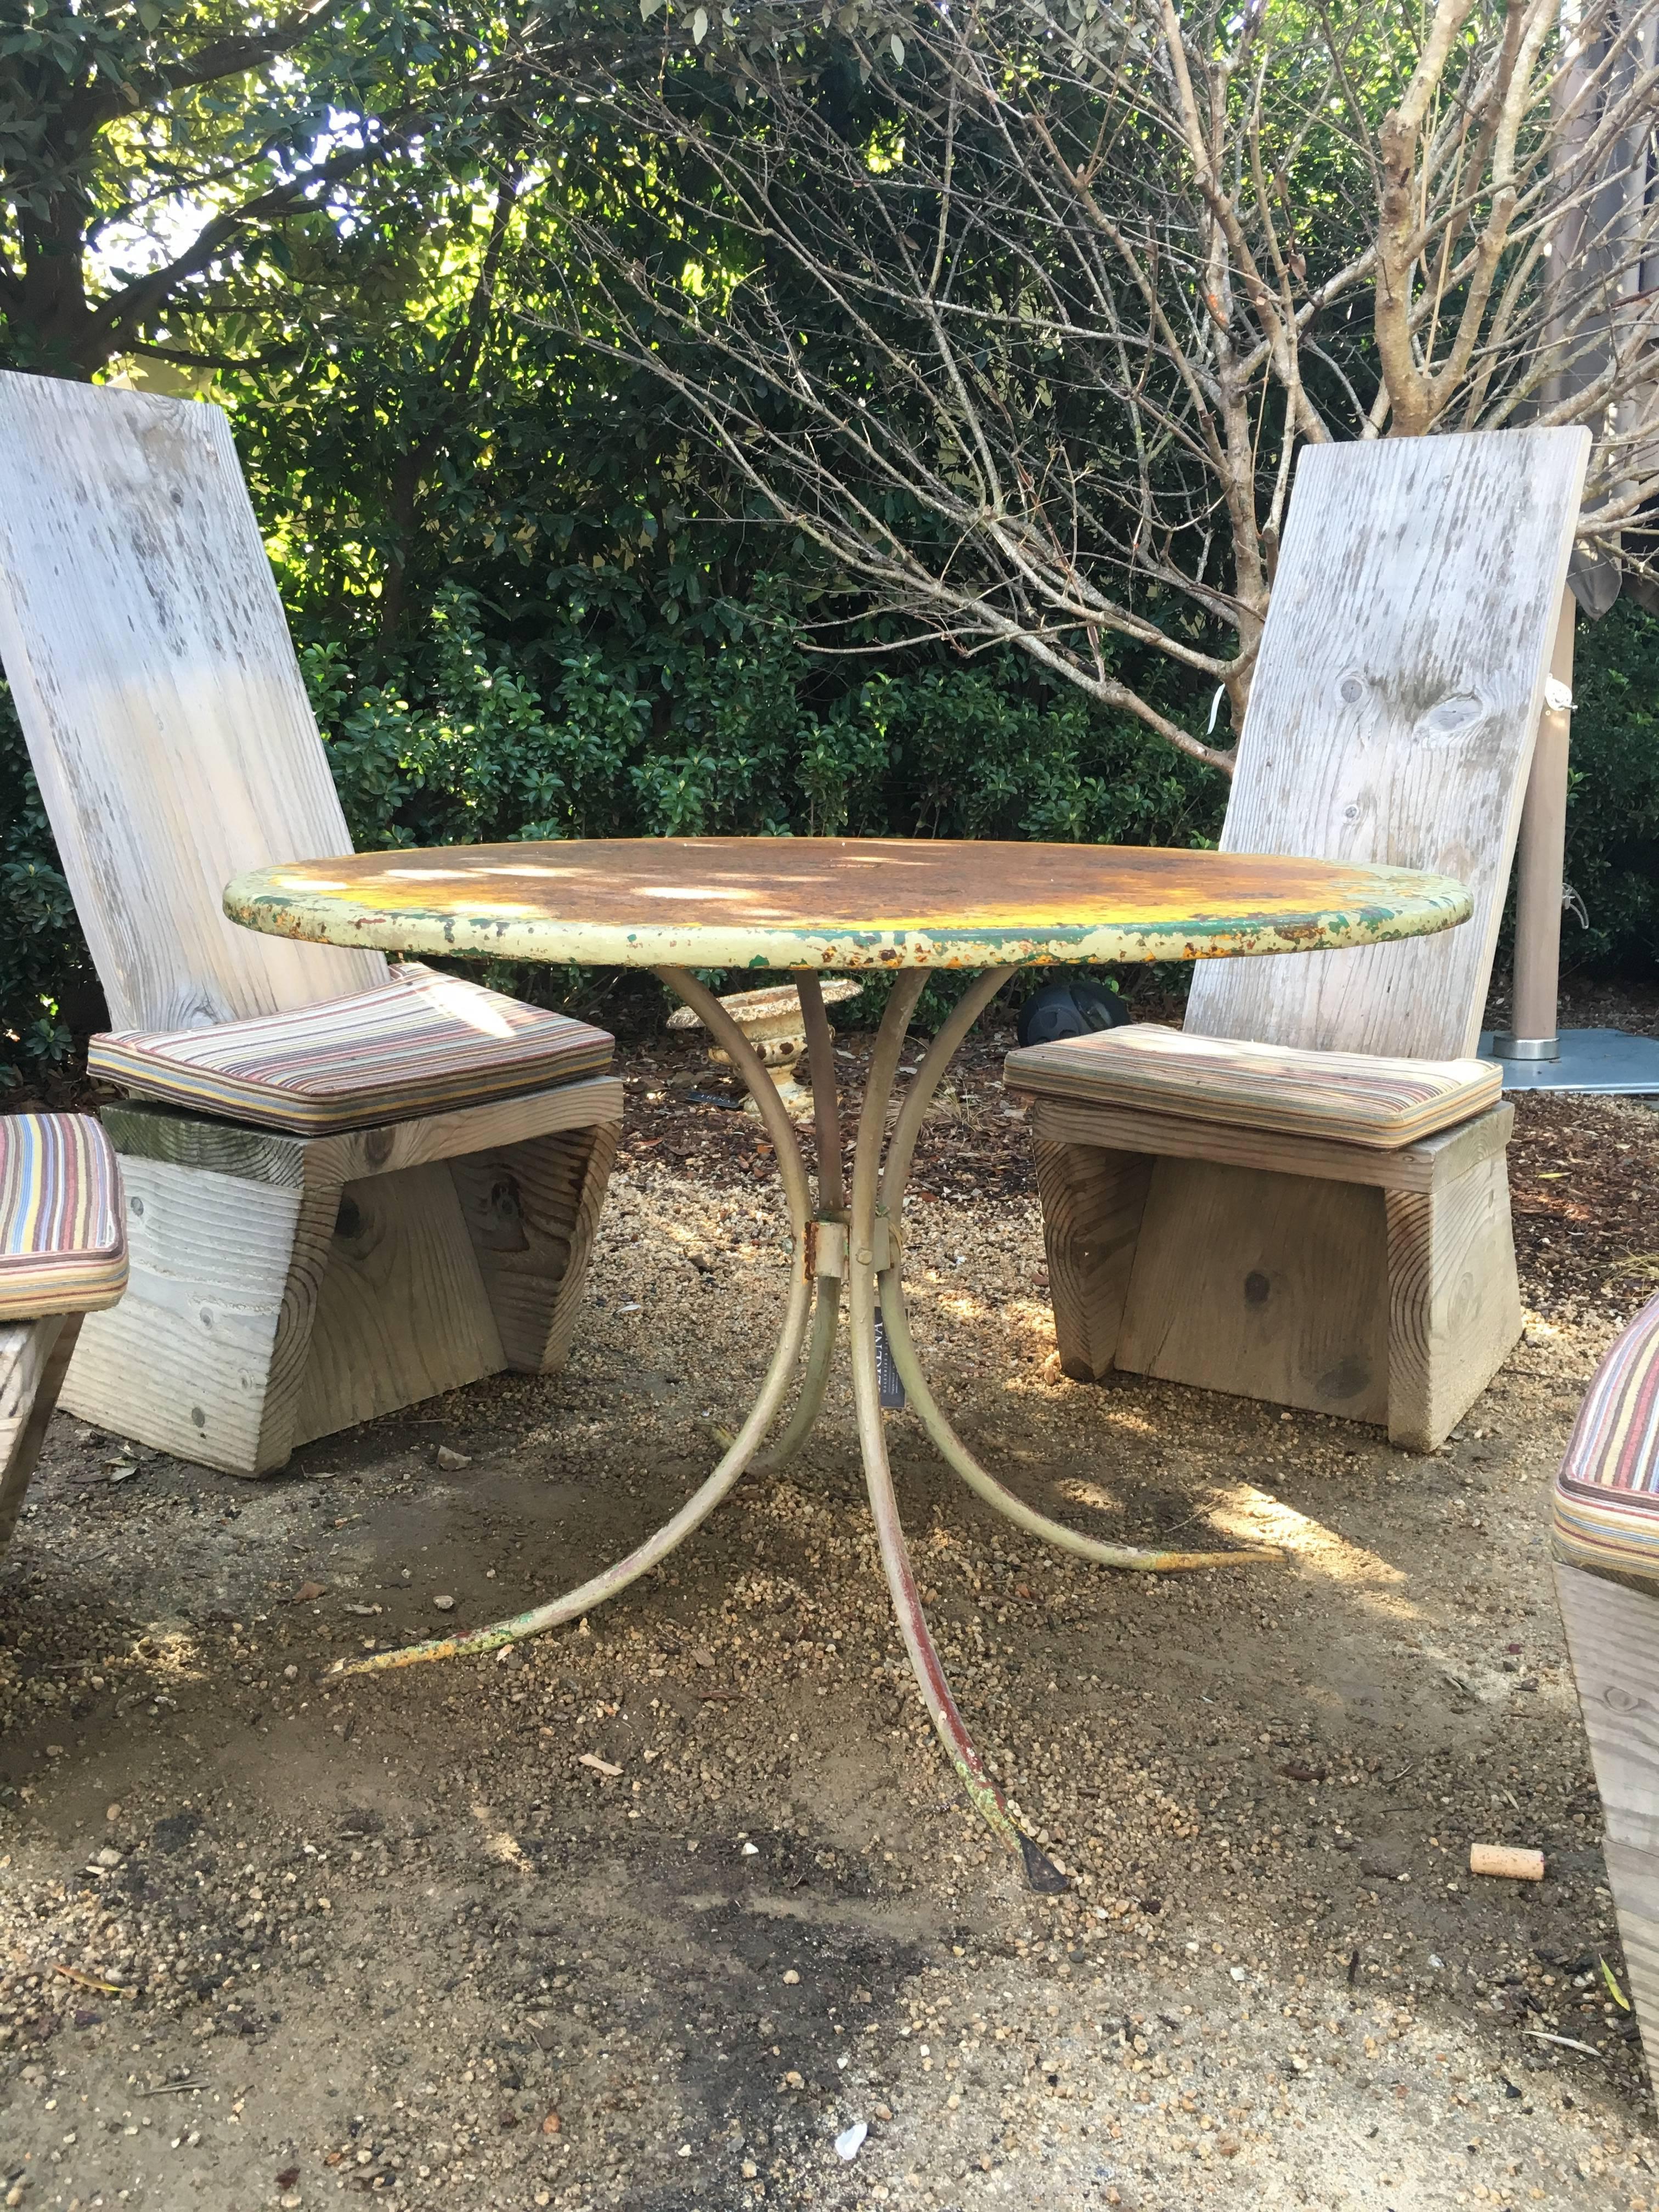 Vintage green garden table, American, circa 1940. Surface patina with multiple layers of paint revealed, including pale and dark green and warm yellow. Minor wear consistent with age and use.
